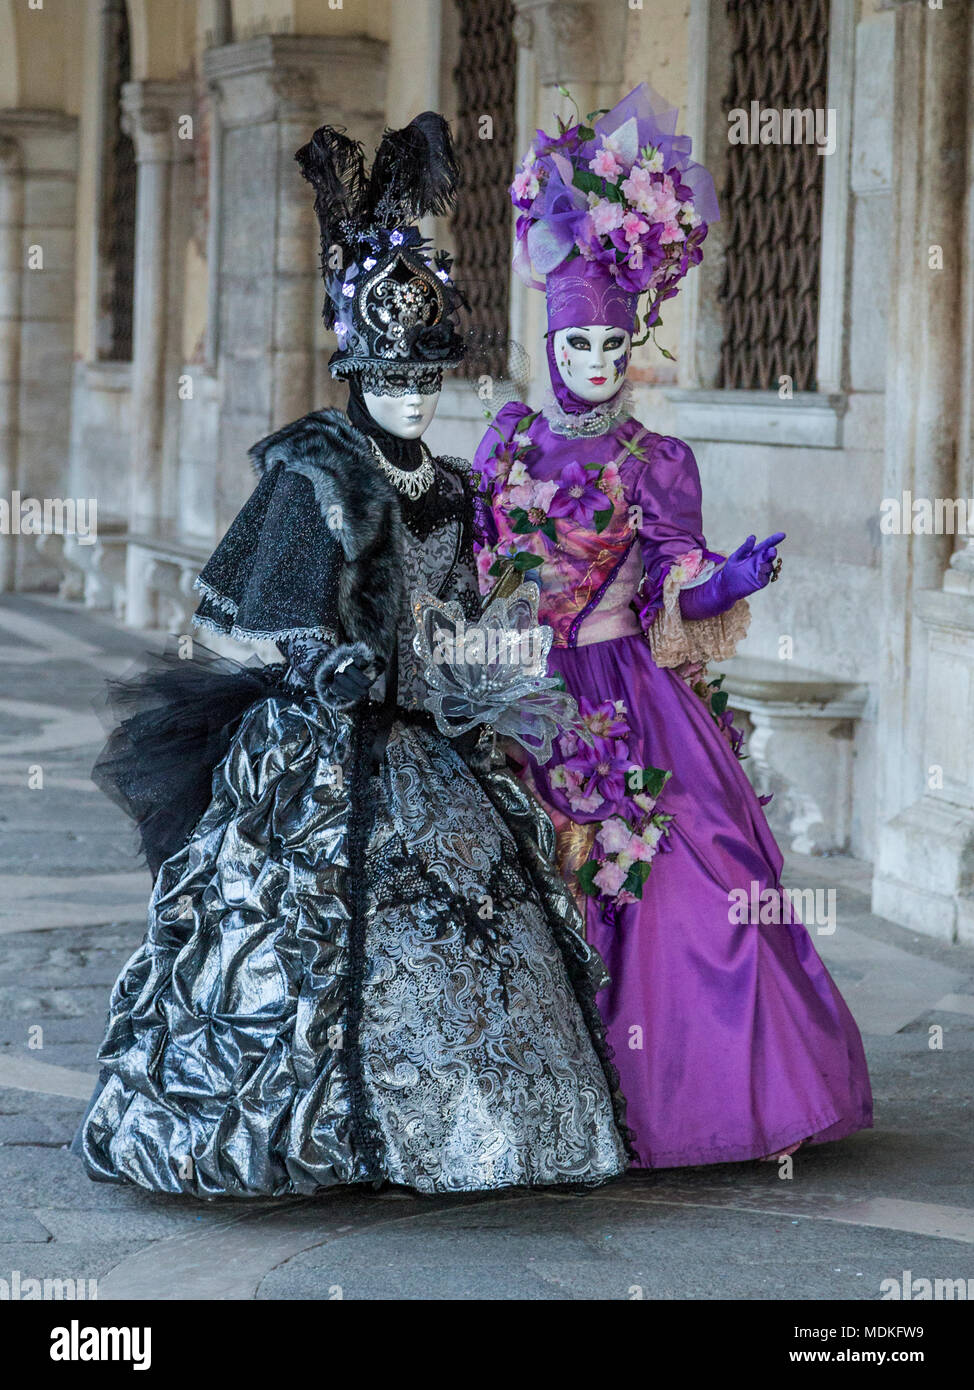 Venice Carnival, costumes, masks, masked ball, February, Piazza San Marco,  St Mark's Square Stock Photo - Alamy